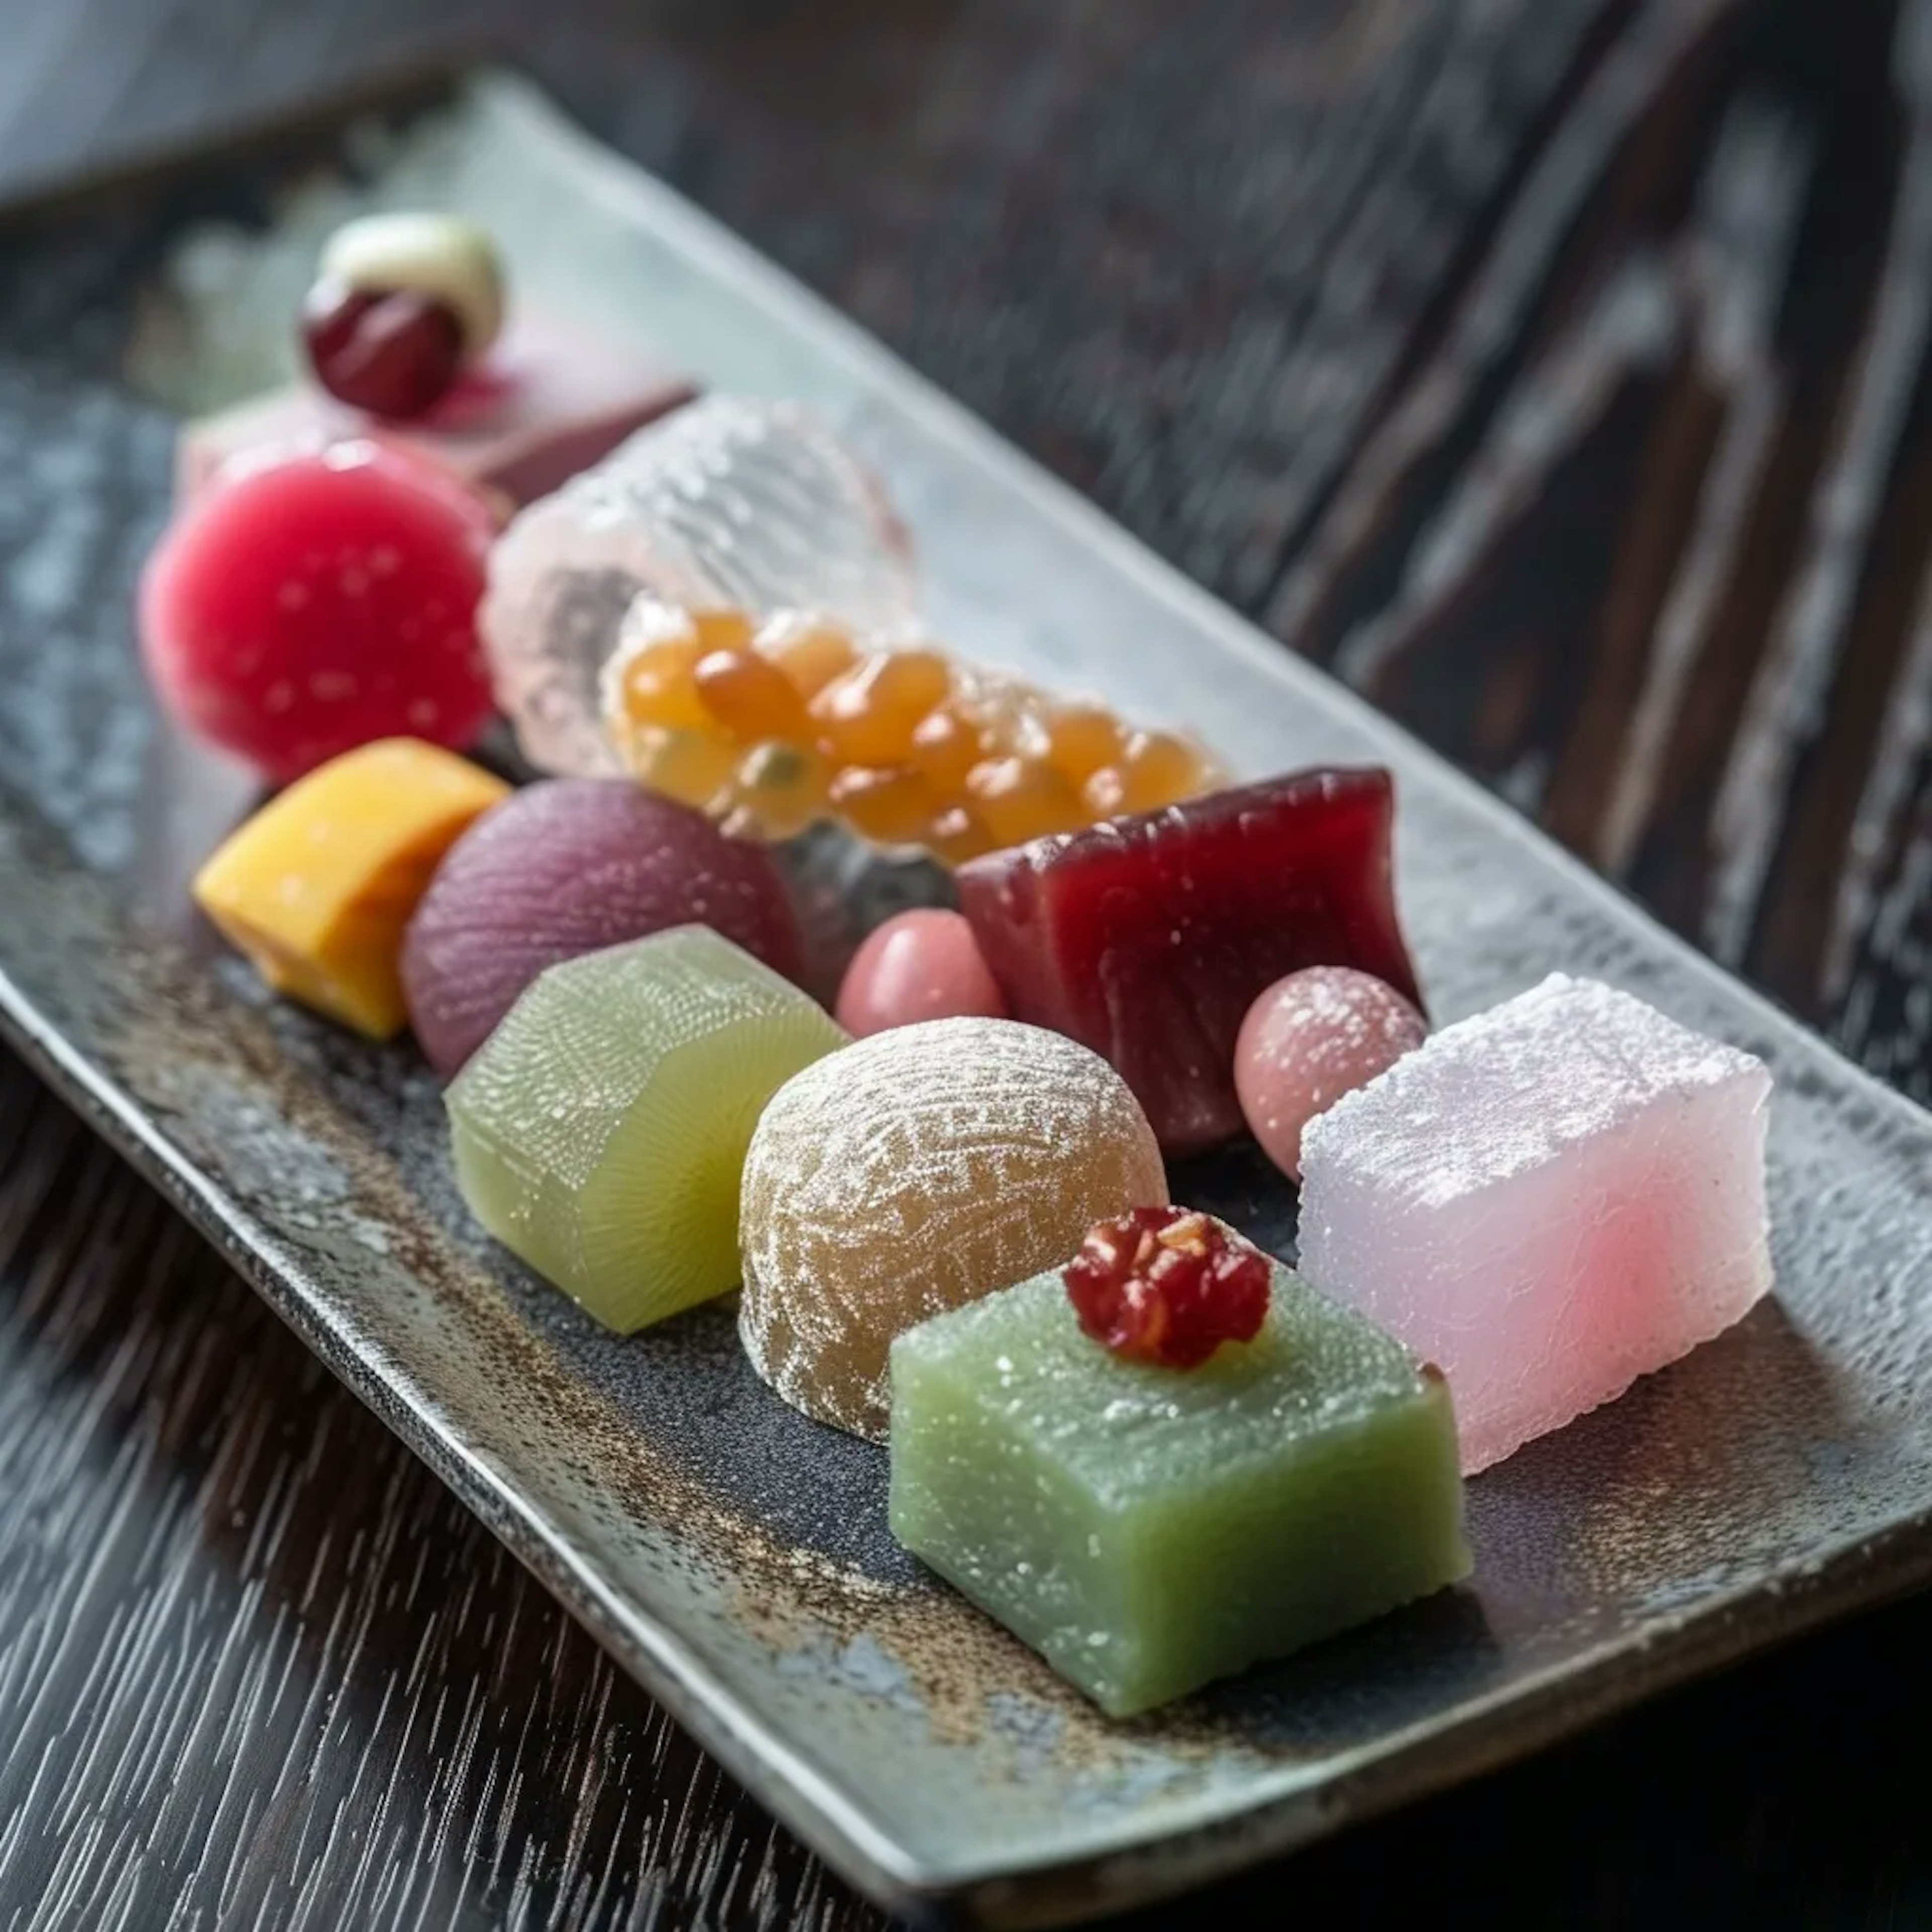 undefined-https://d3nrav7vo3lya8.cloudfront.net/profile_photos/japanese-sweets/49p.webp